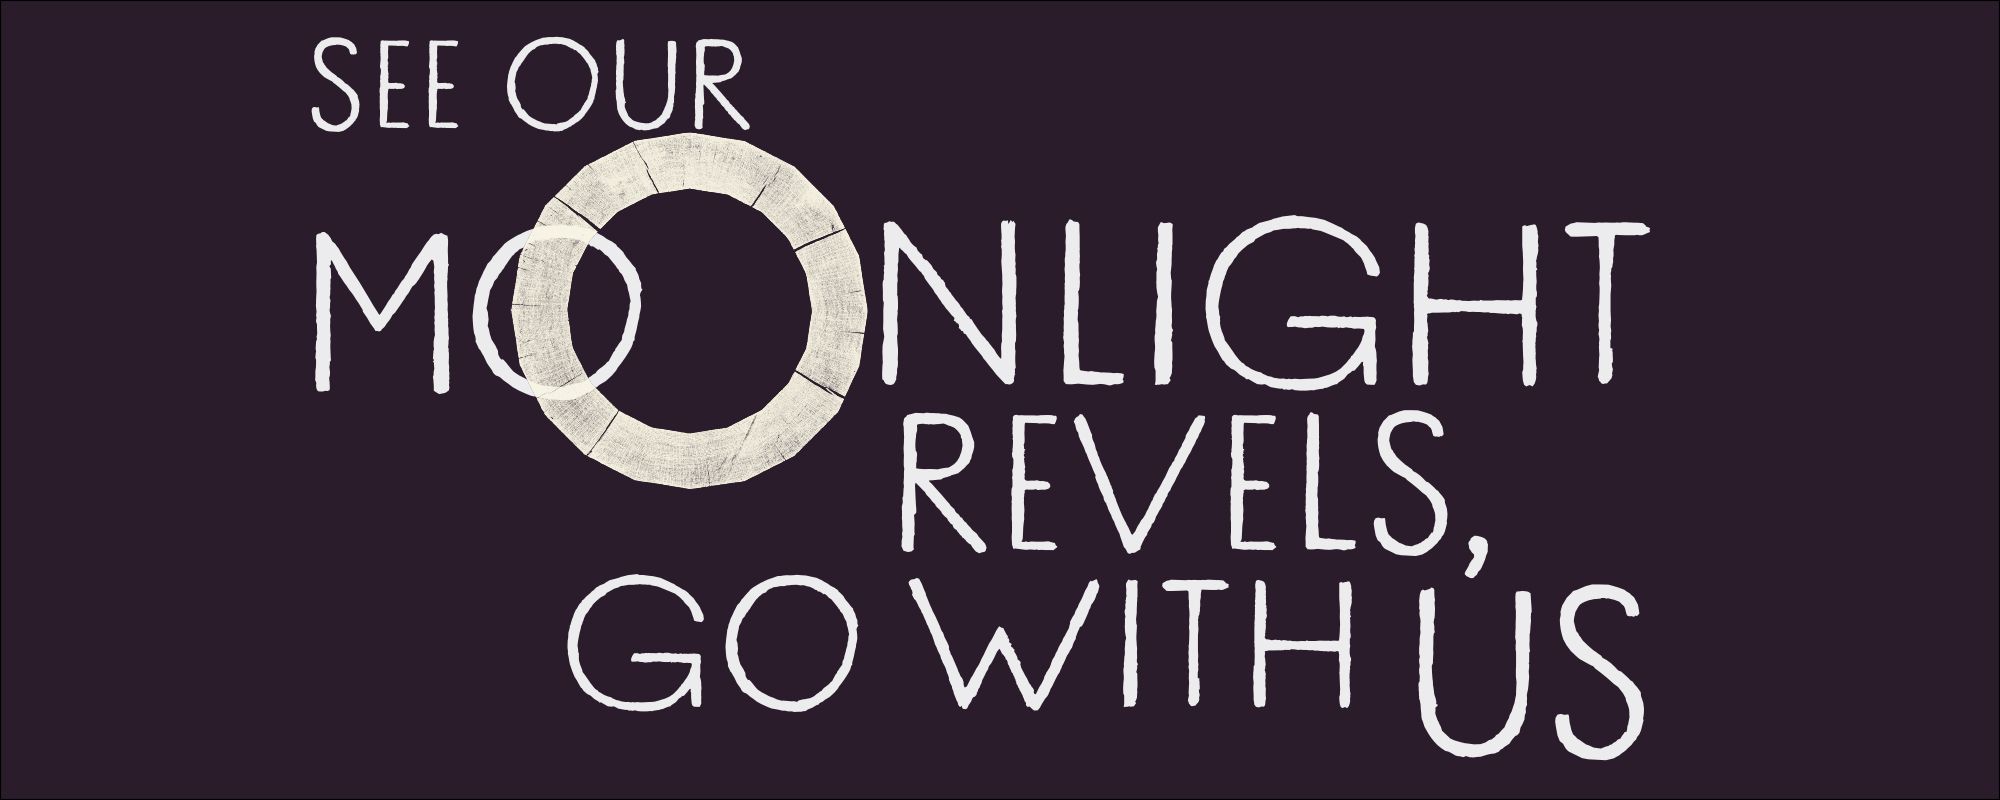 On a purple background, white text reads ‘see our moonlight revels, go with us’